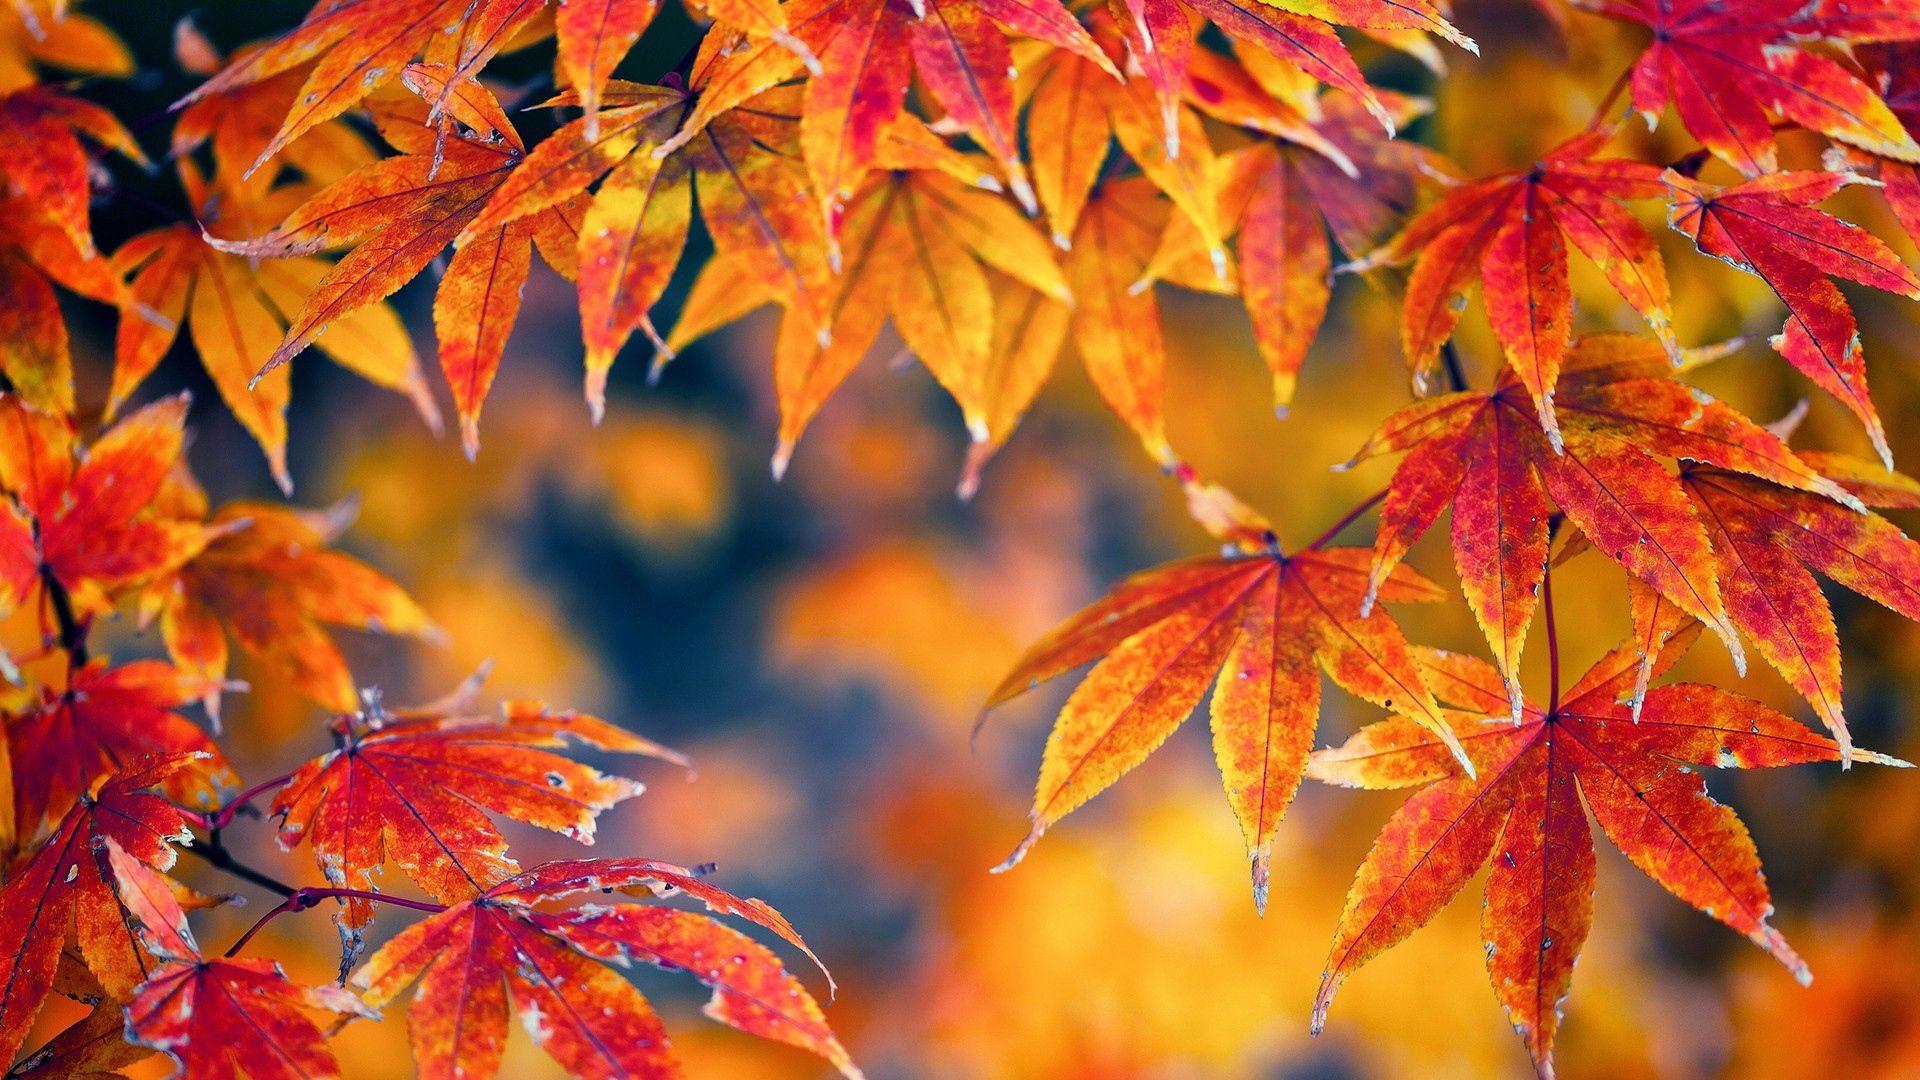 Maple Leaves Wallpapers - Top Free Maple Leaves Backgrounds ...